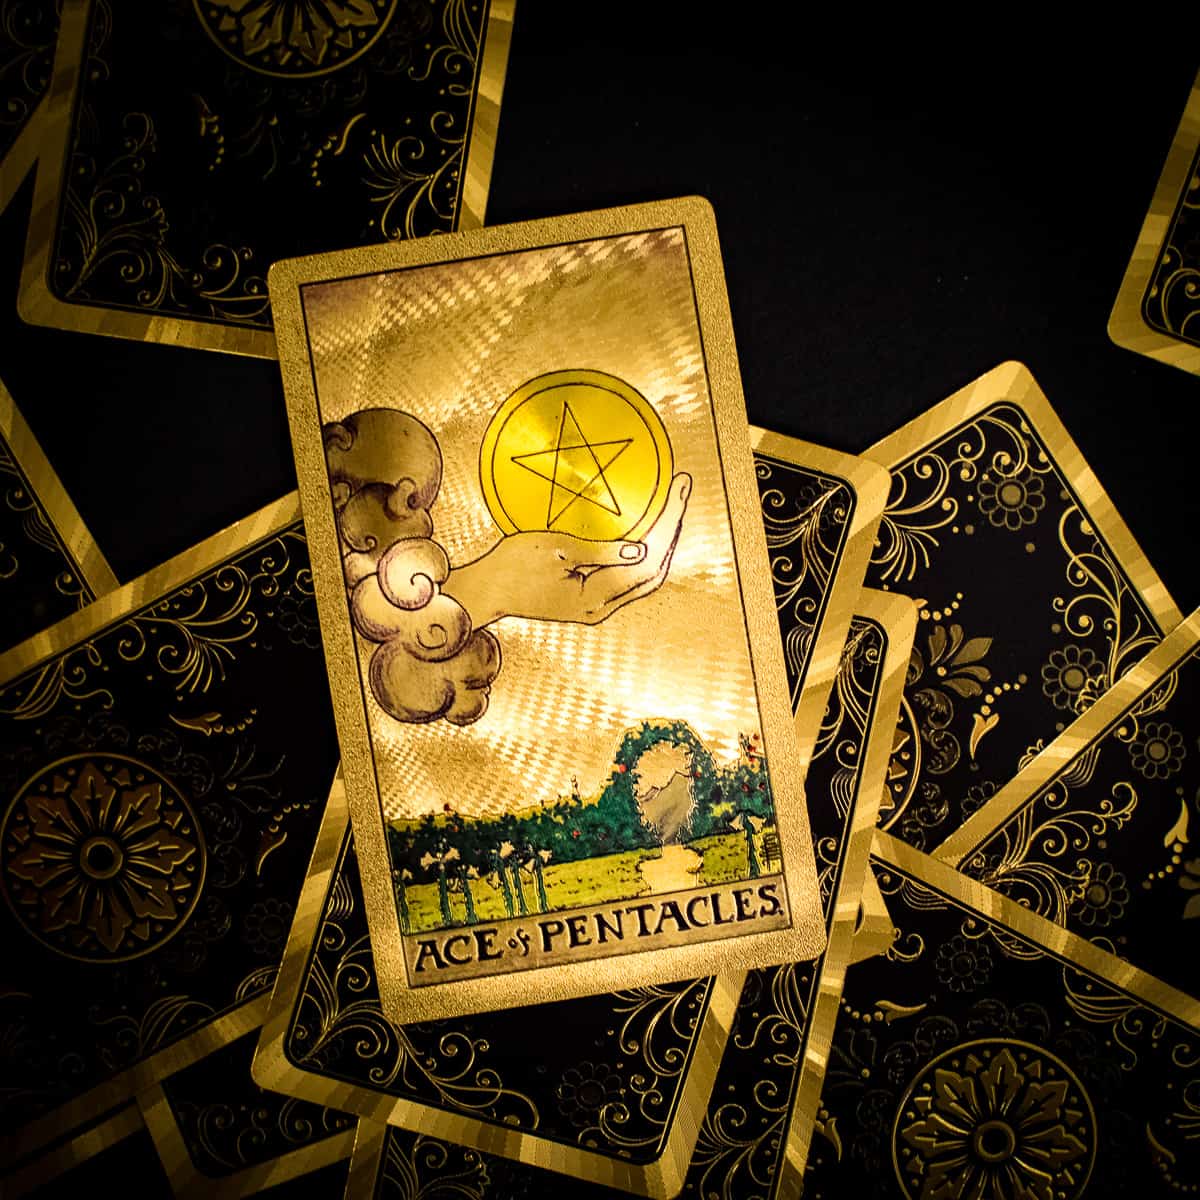 The Ace of Pentacles card from the deck of tarot depicting a large hand emerging from the clouds holding a single pentacle. 